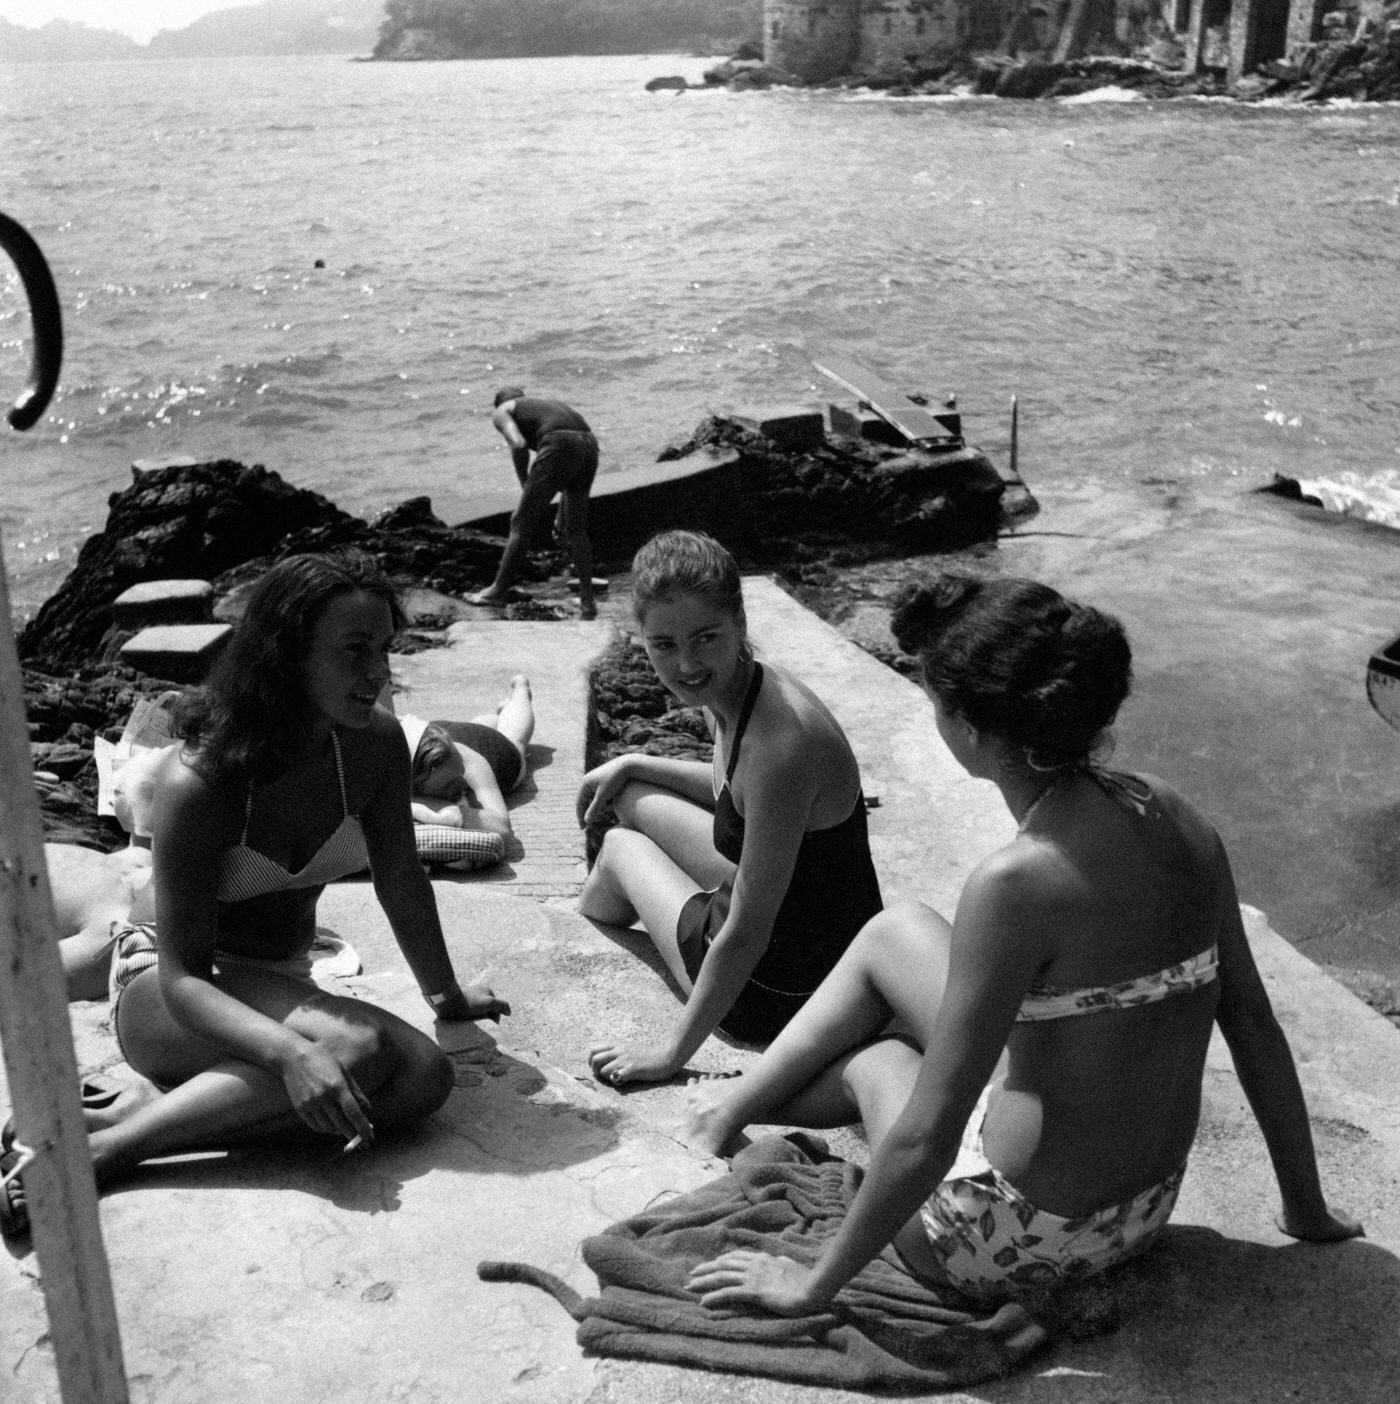 Girls in swimsuits chatting by the sea on the Italian Riviera, 1951.